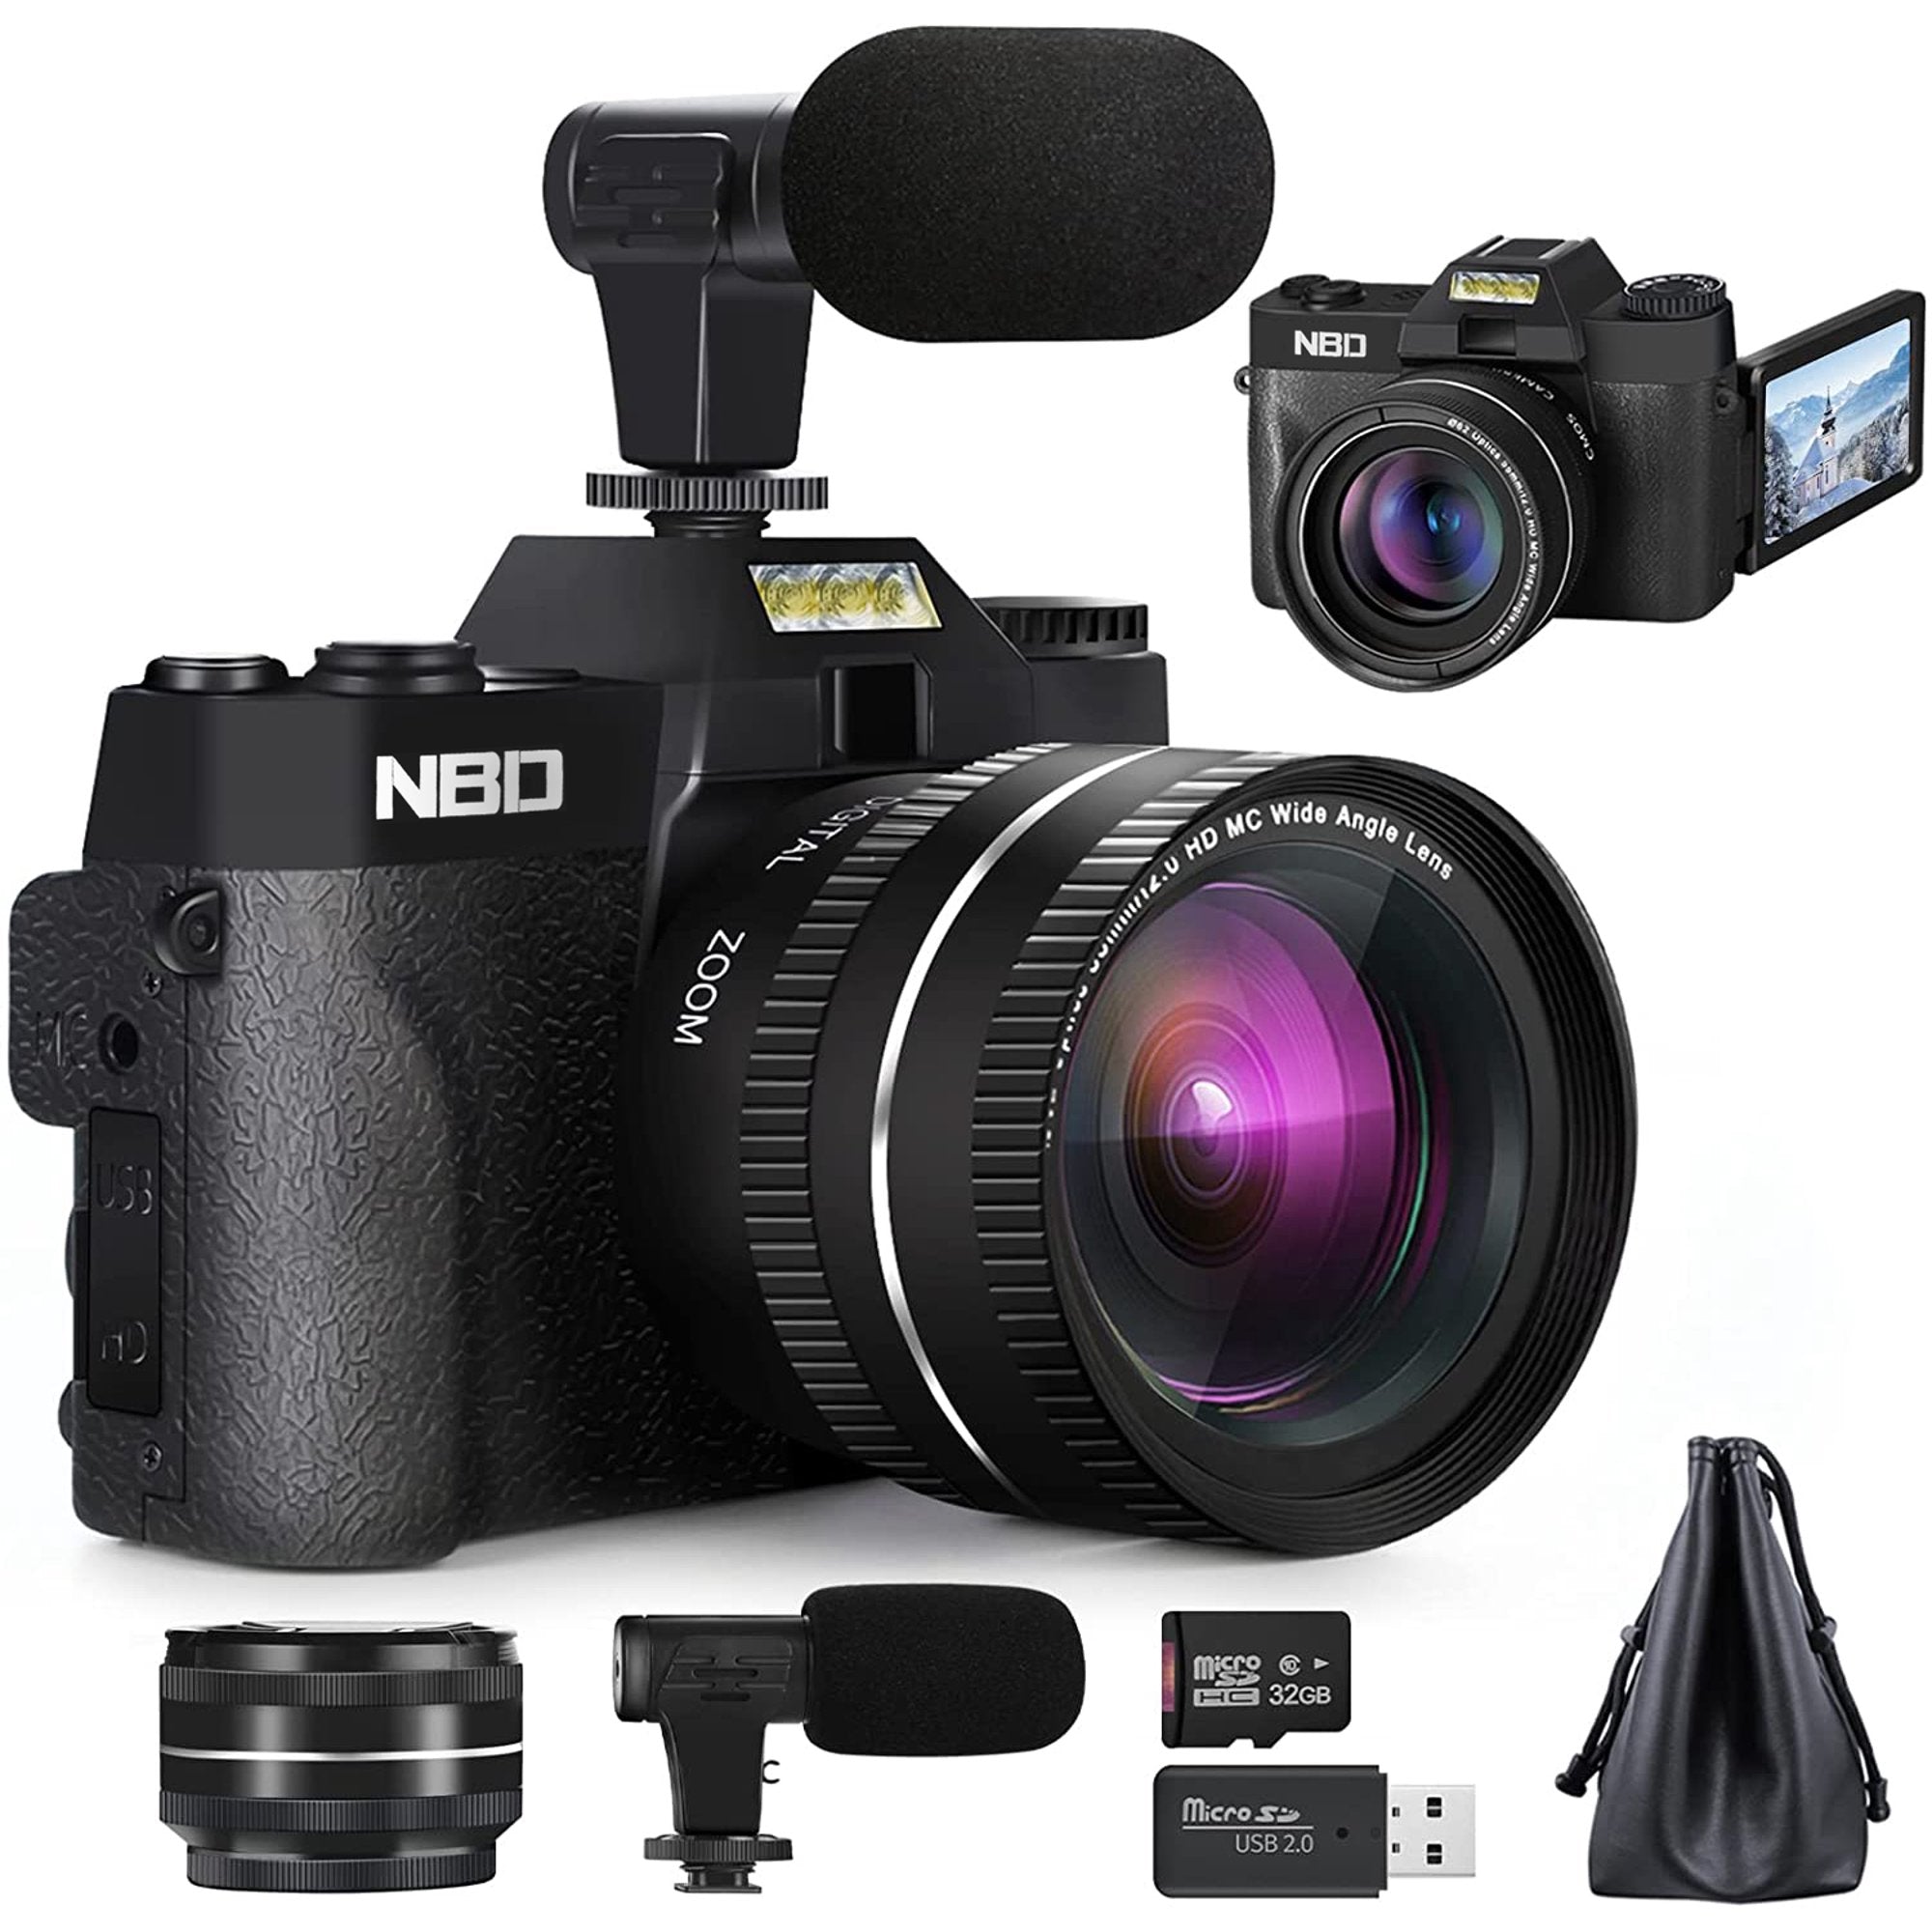 Digital Camera, 4K Video NBD Camera for  with WiFi, 3.0 Flip  Screen, Wide Angle Lens, Macro Lens, 16X Zoom